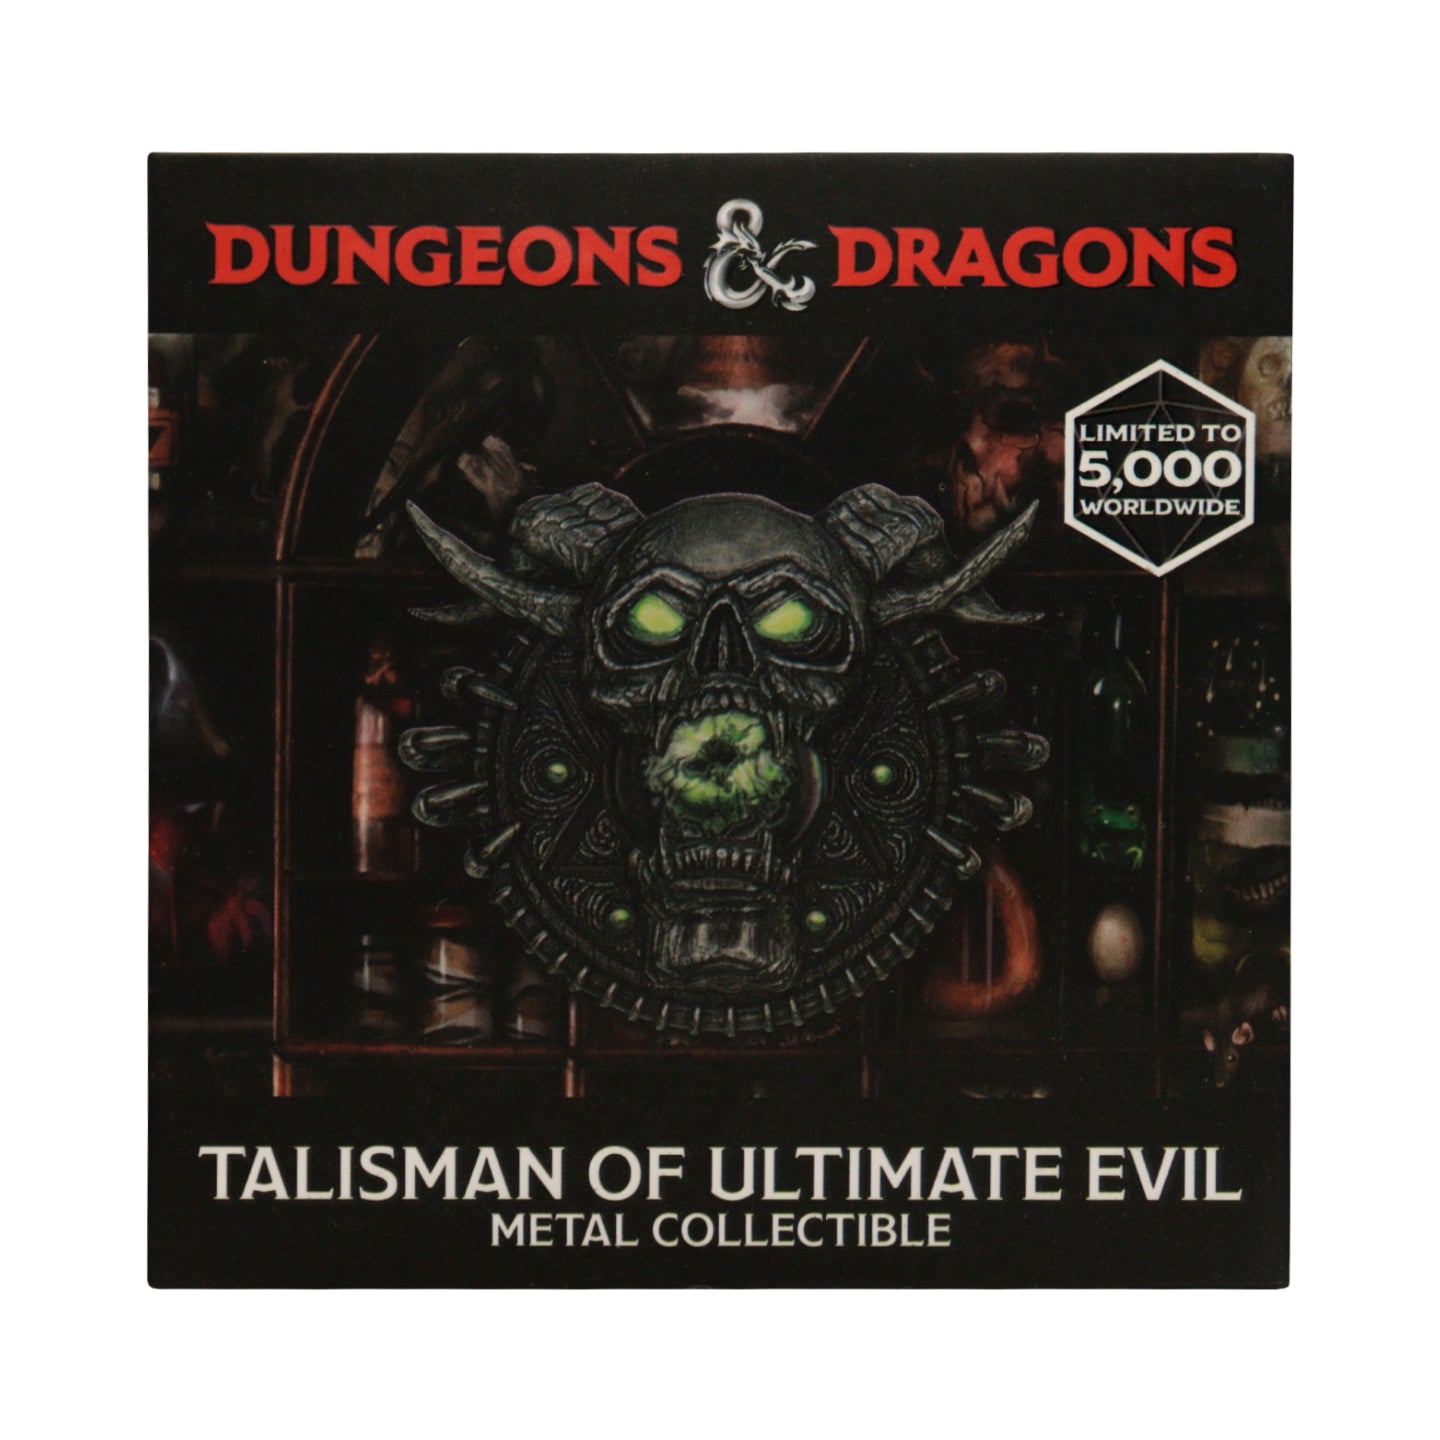 Dungeons & Dragons Limited Edition Talisman of Ultimate Evil Medallion and Art Card